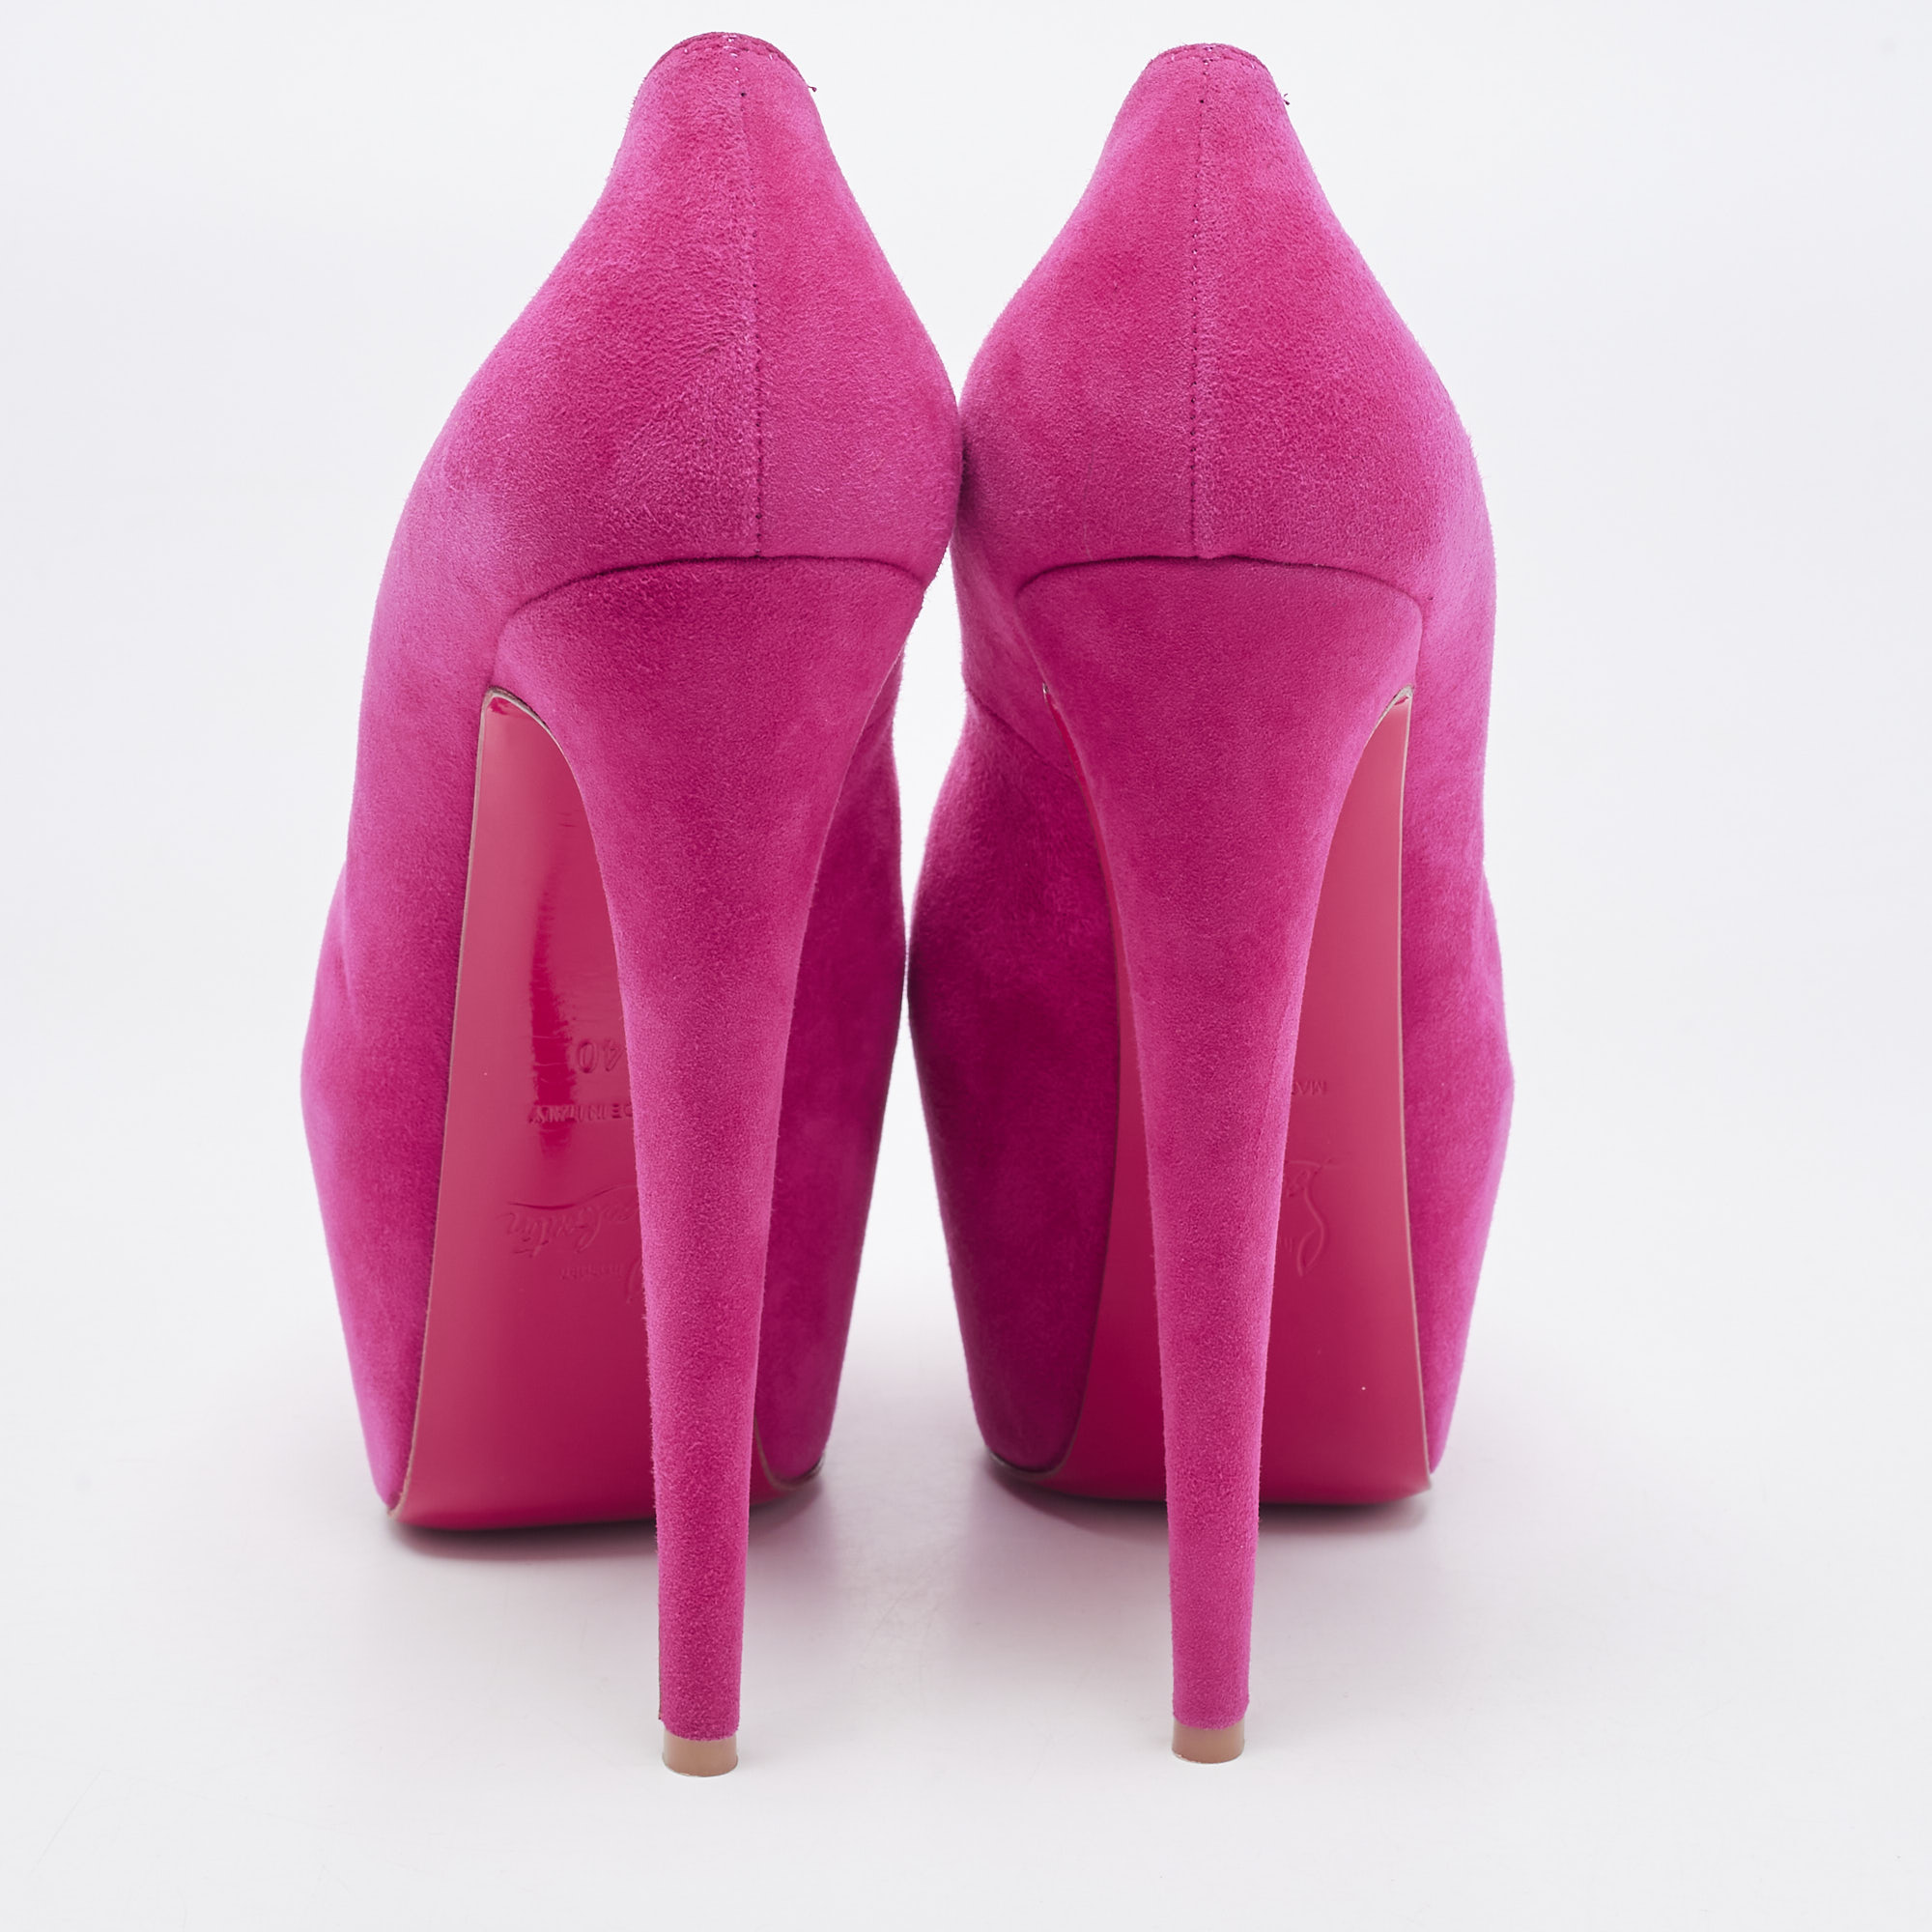 Christian Louboutin Pink Suede Highness Pumps Size 40